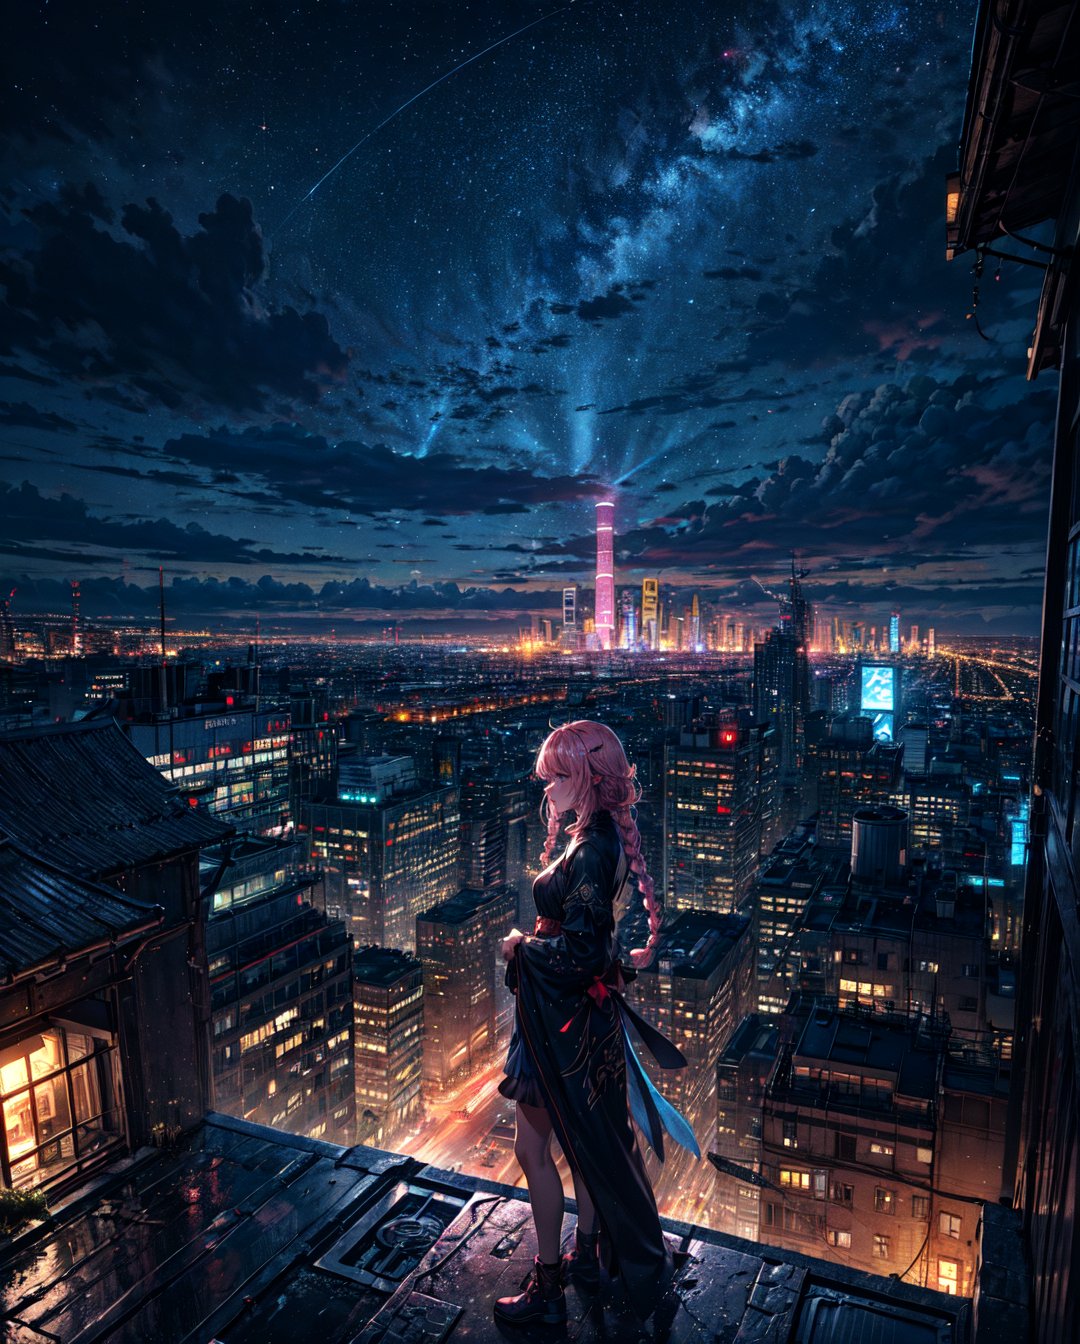 panoramic view, panoramic shot, masterpiece,best quality,High definition, high resolution, dark blue night background,central road,fluttering leaves,wind, elements, beautiful night summer,standing alone,1 beautiful woman, pink braids,More Details, city in the distance, standing on a rooftop, city below, city night life, beautiful atmosphere, epic fantasy composition 